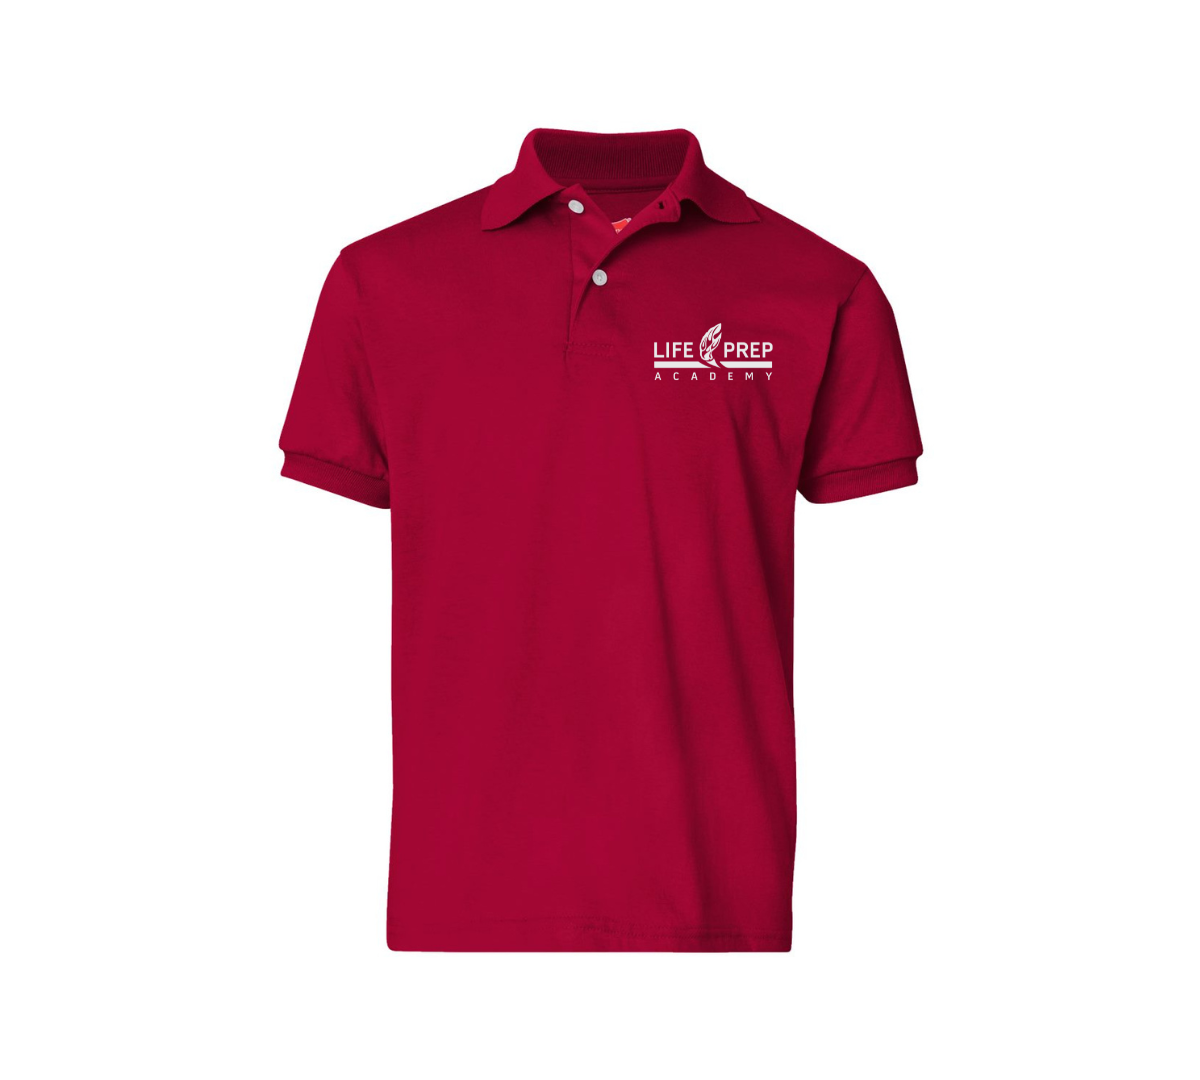 Youth Unisex Red Polo